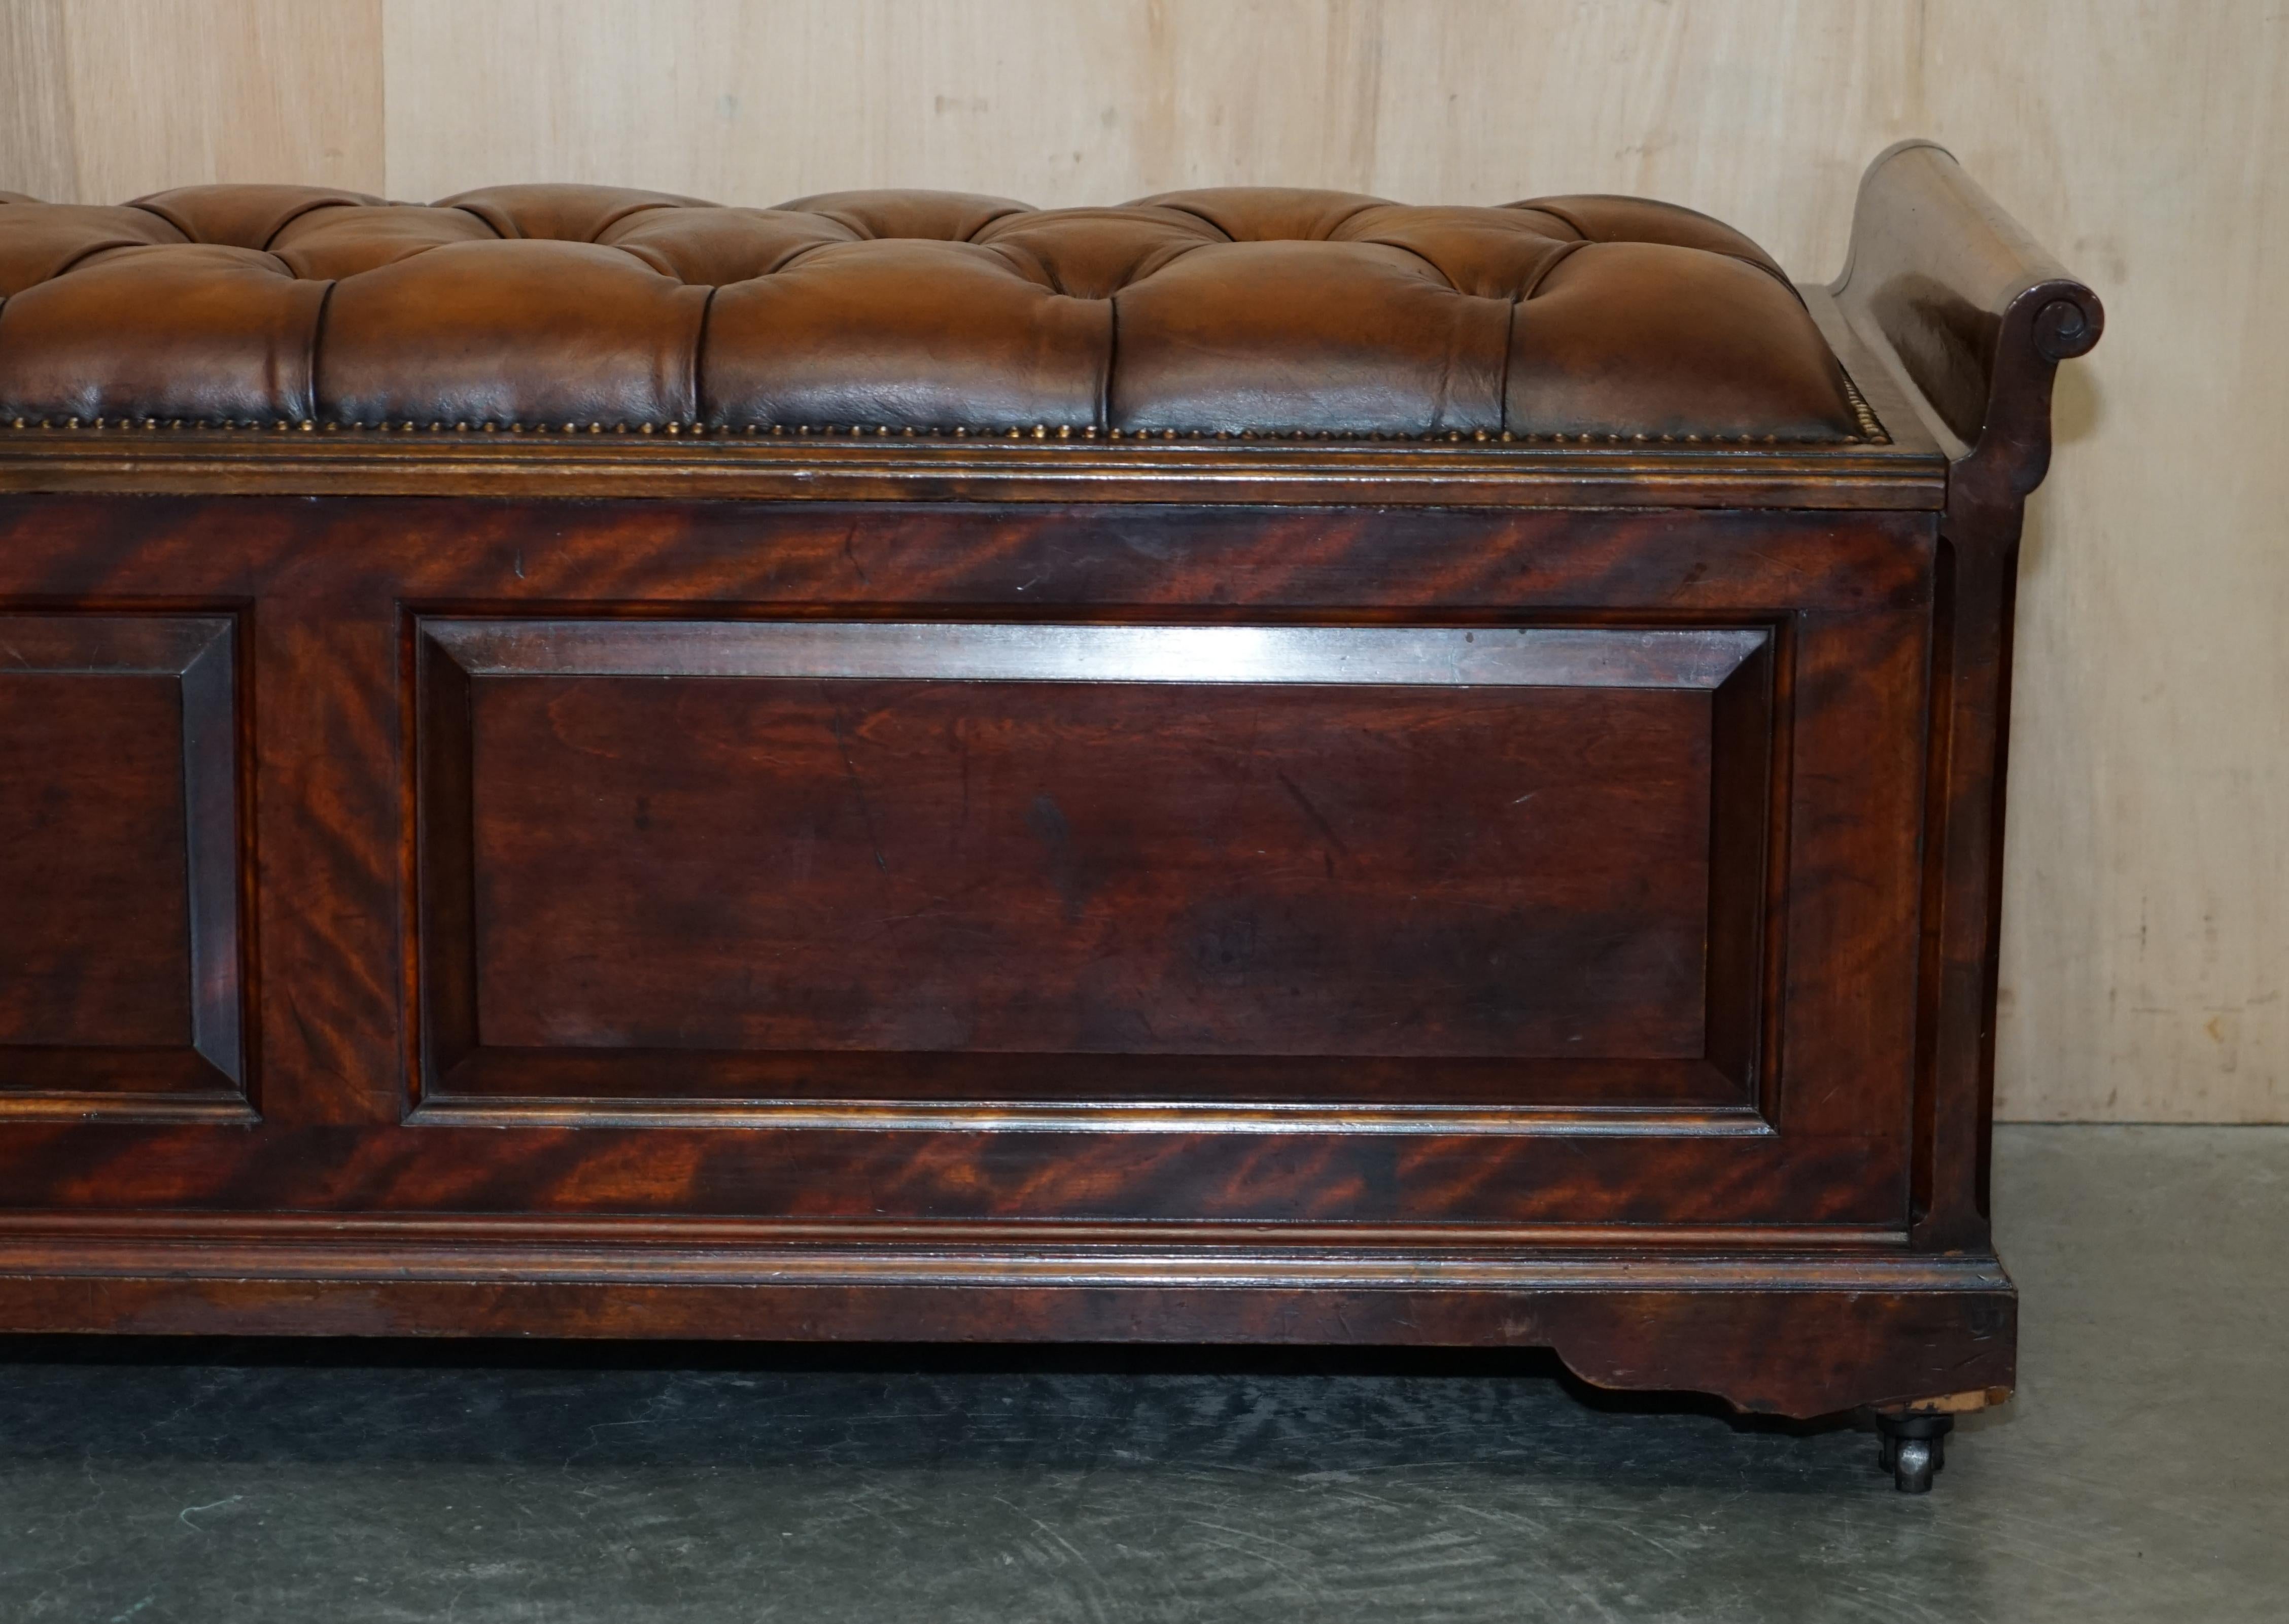 Hand-Crafted Antique Restored Brown Leather Chesterfield Flamed Hardwood Hall Bench Ottoman For Sale